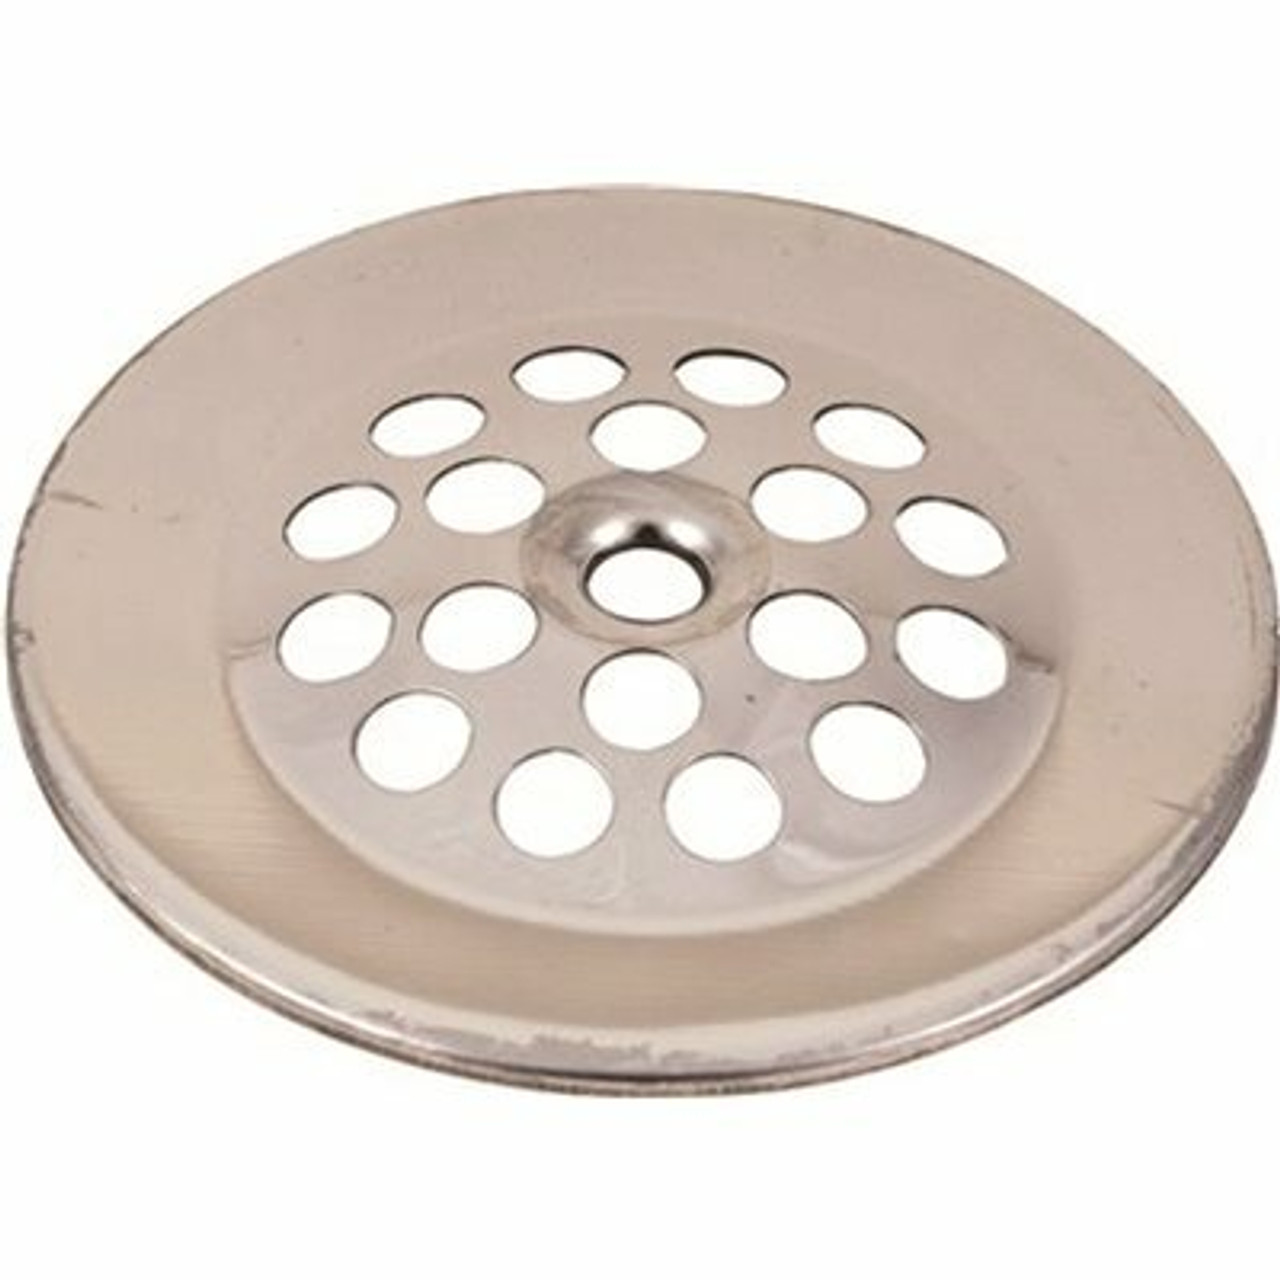 Proplus 2-7/8 In. Bathtub Shoe Strainer For Gerber In Chrome Plated